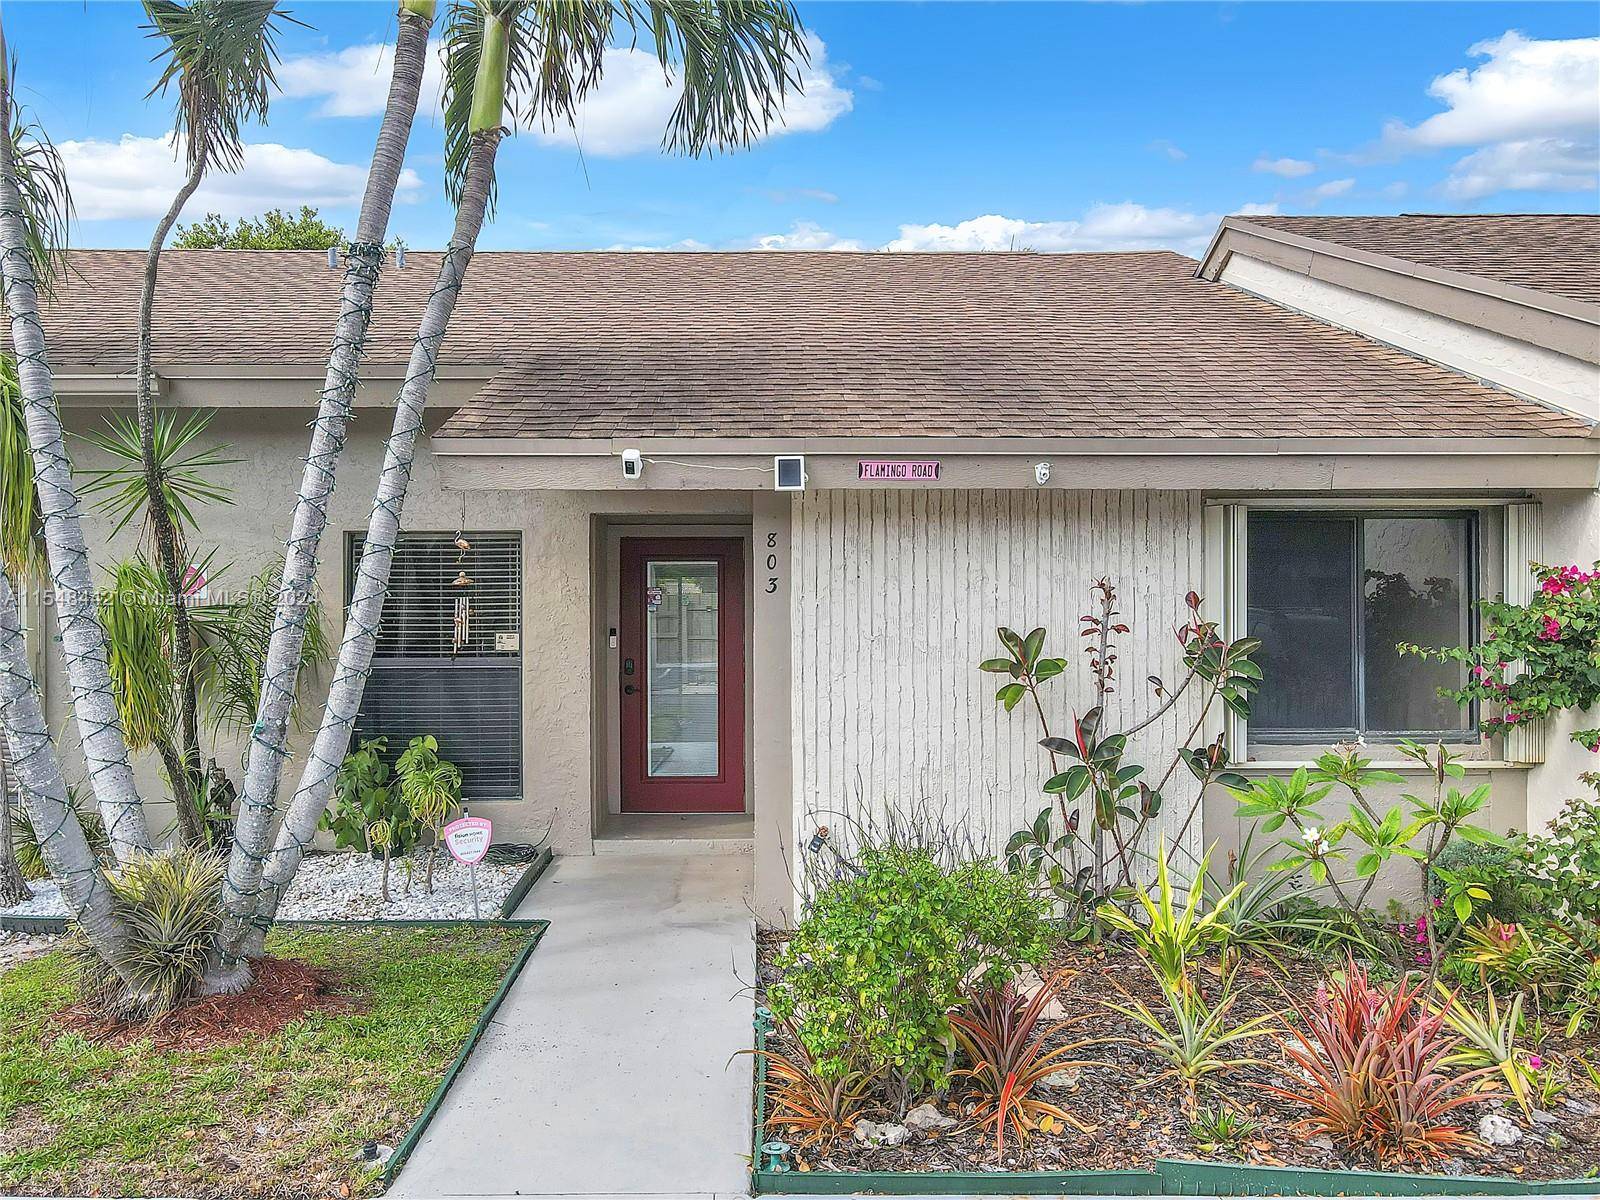 Welcome to this charming 2 bedroom townhome located less than 20 minutes from Fort Lauderdale Wilton Manors in the Pines of Oakland Forest West community.